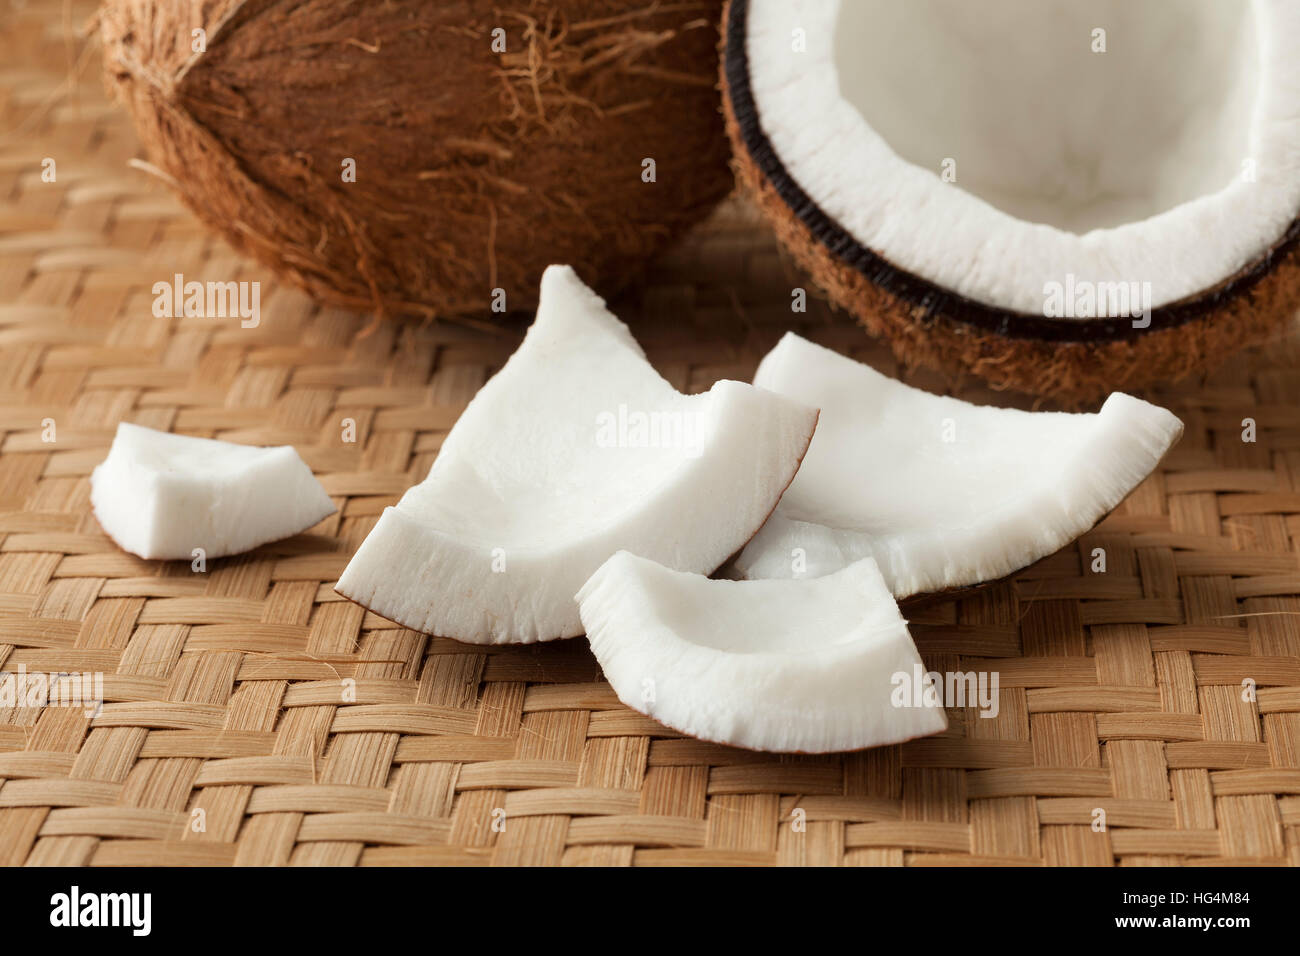 Cracked fresh coconut with pieces Stock Photo